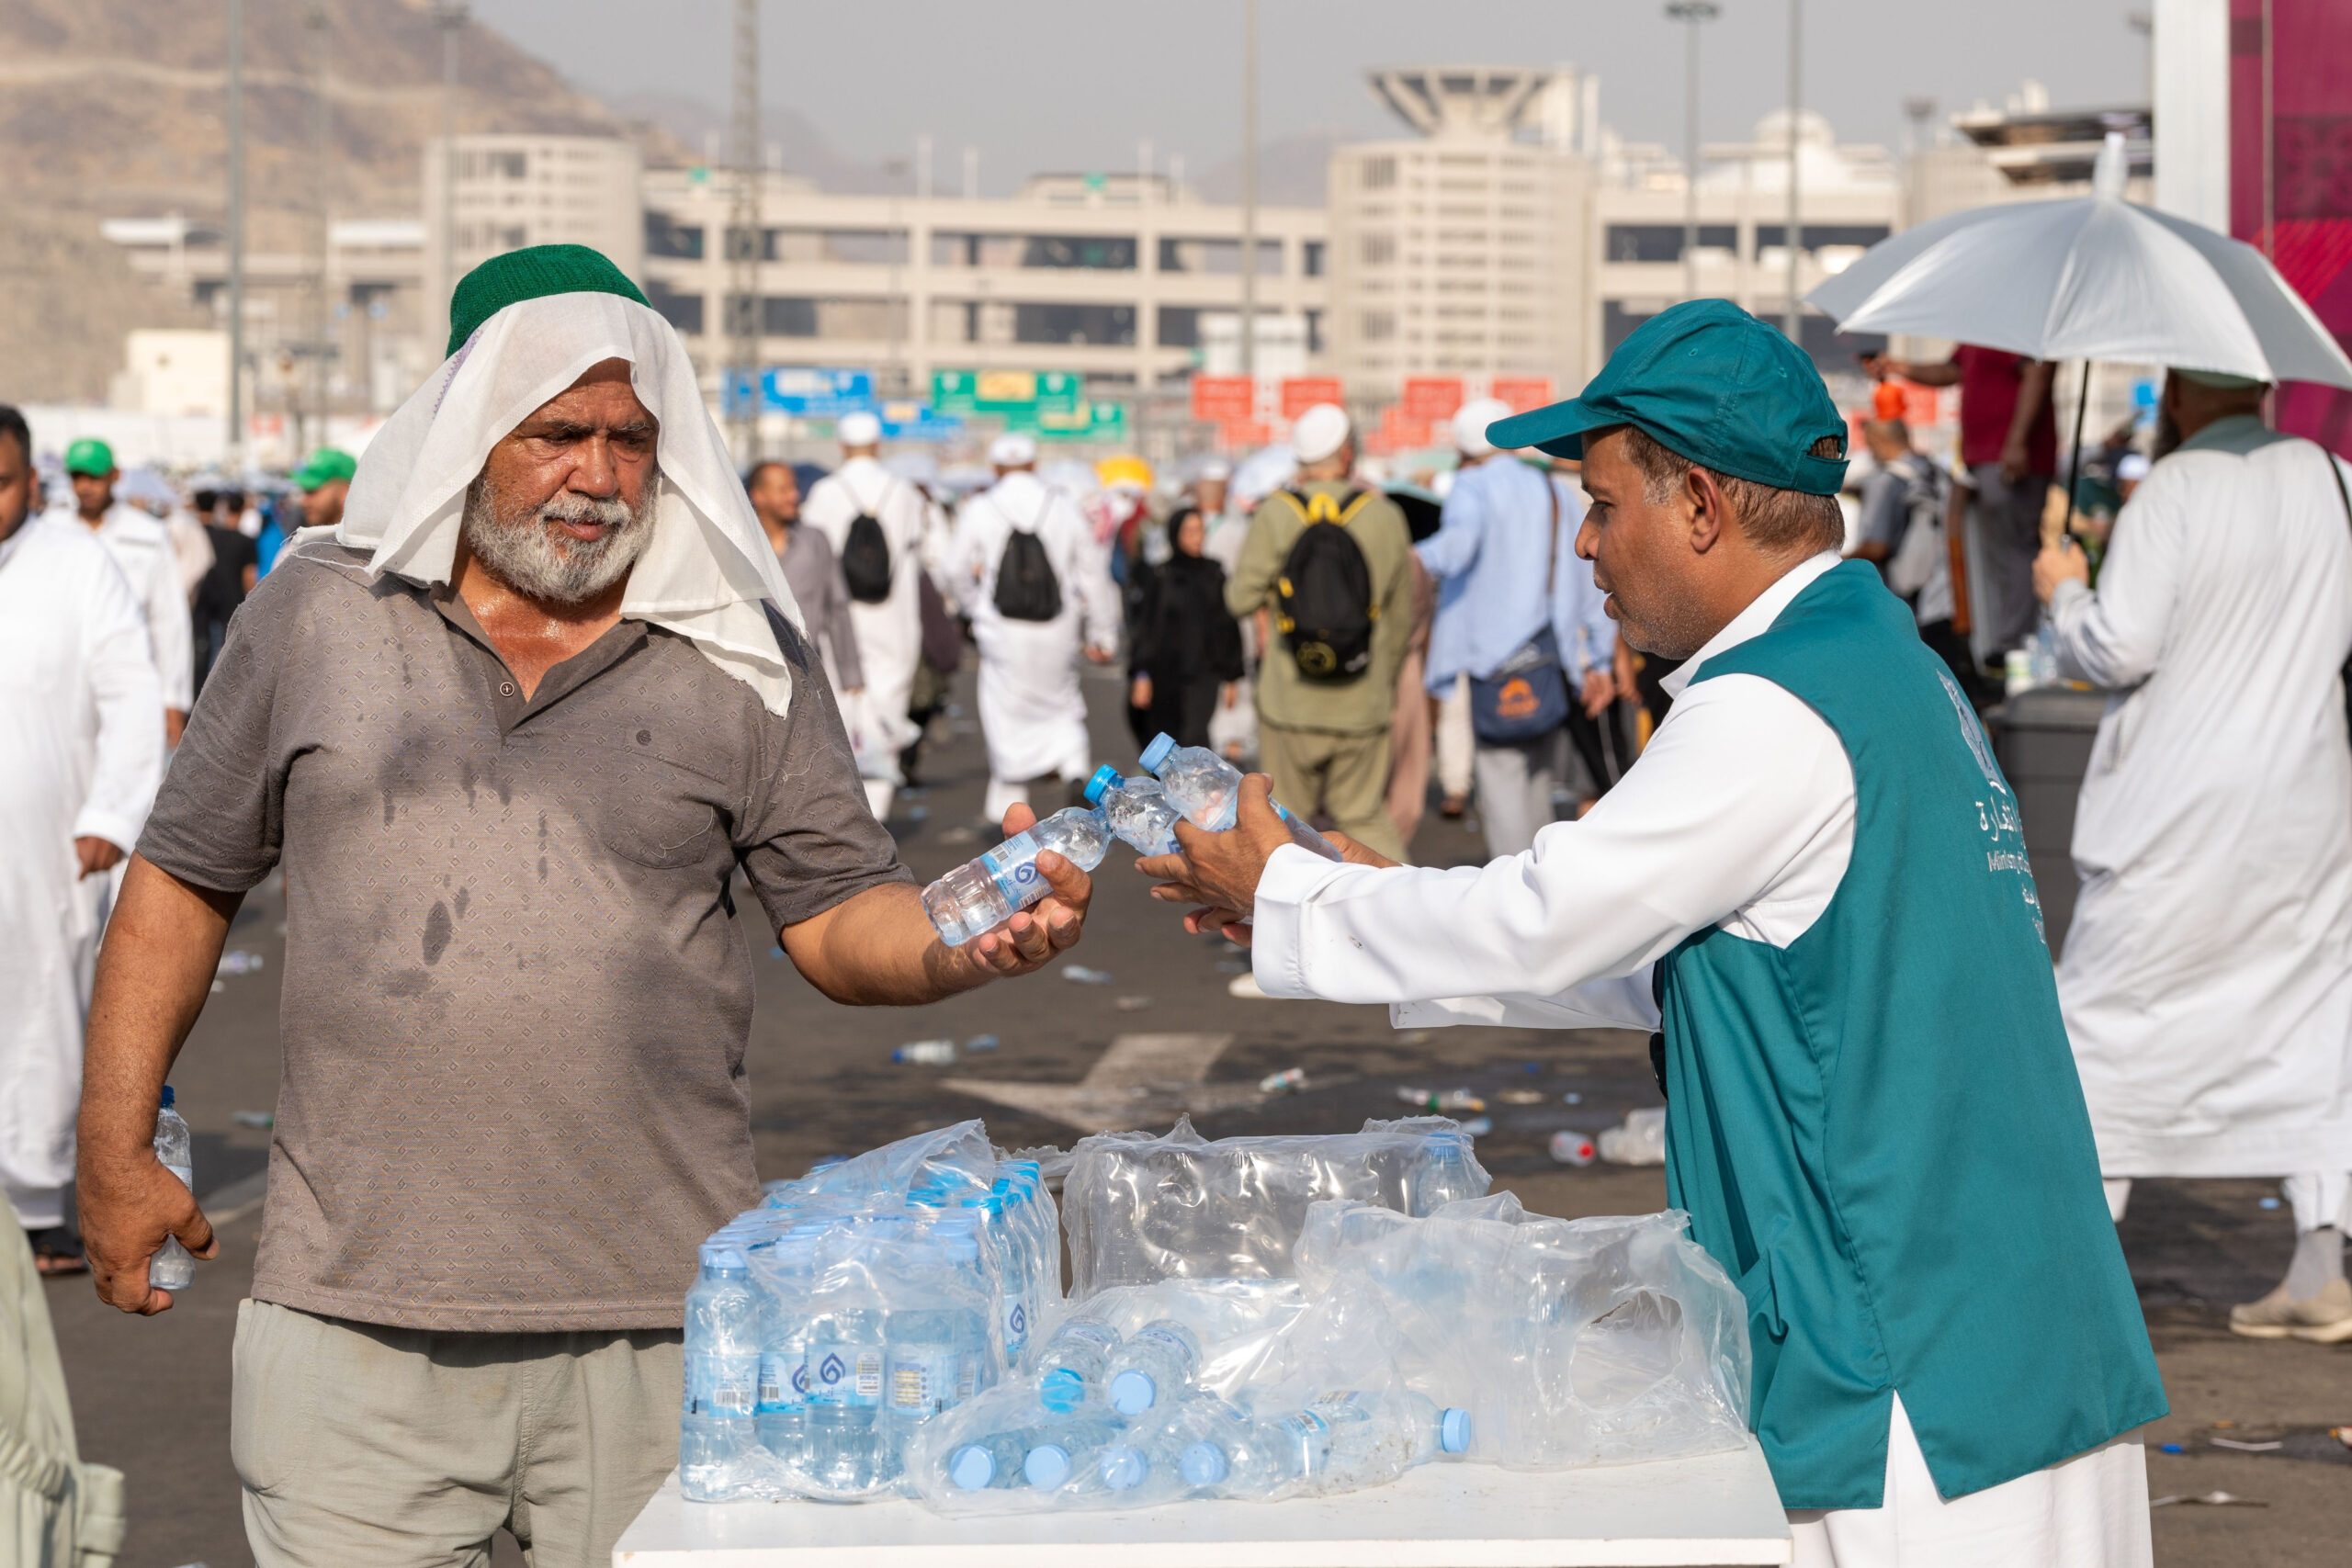 Water is handed out to pilgrims in Mecca. Hundreds of pilgrims without a Hajj permit died during extreme heat last week